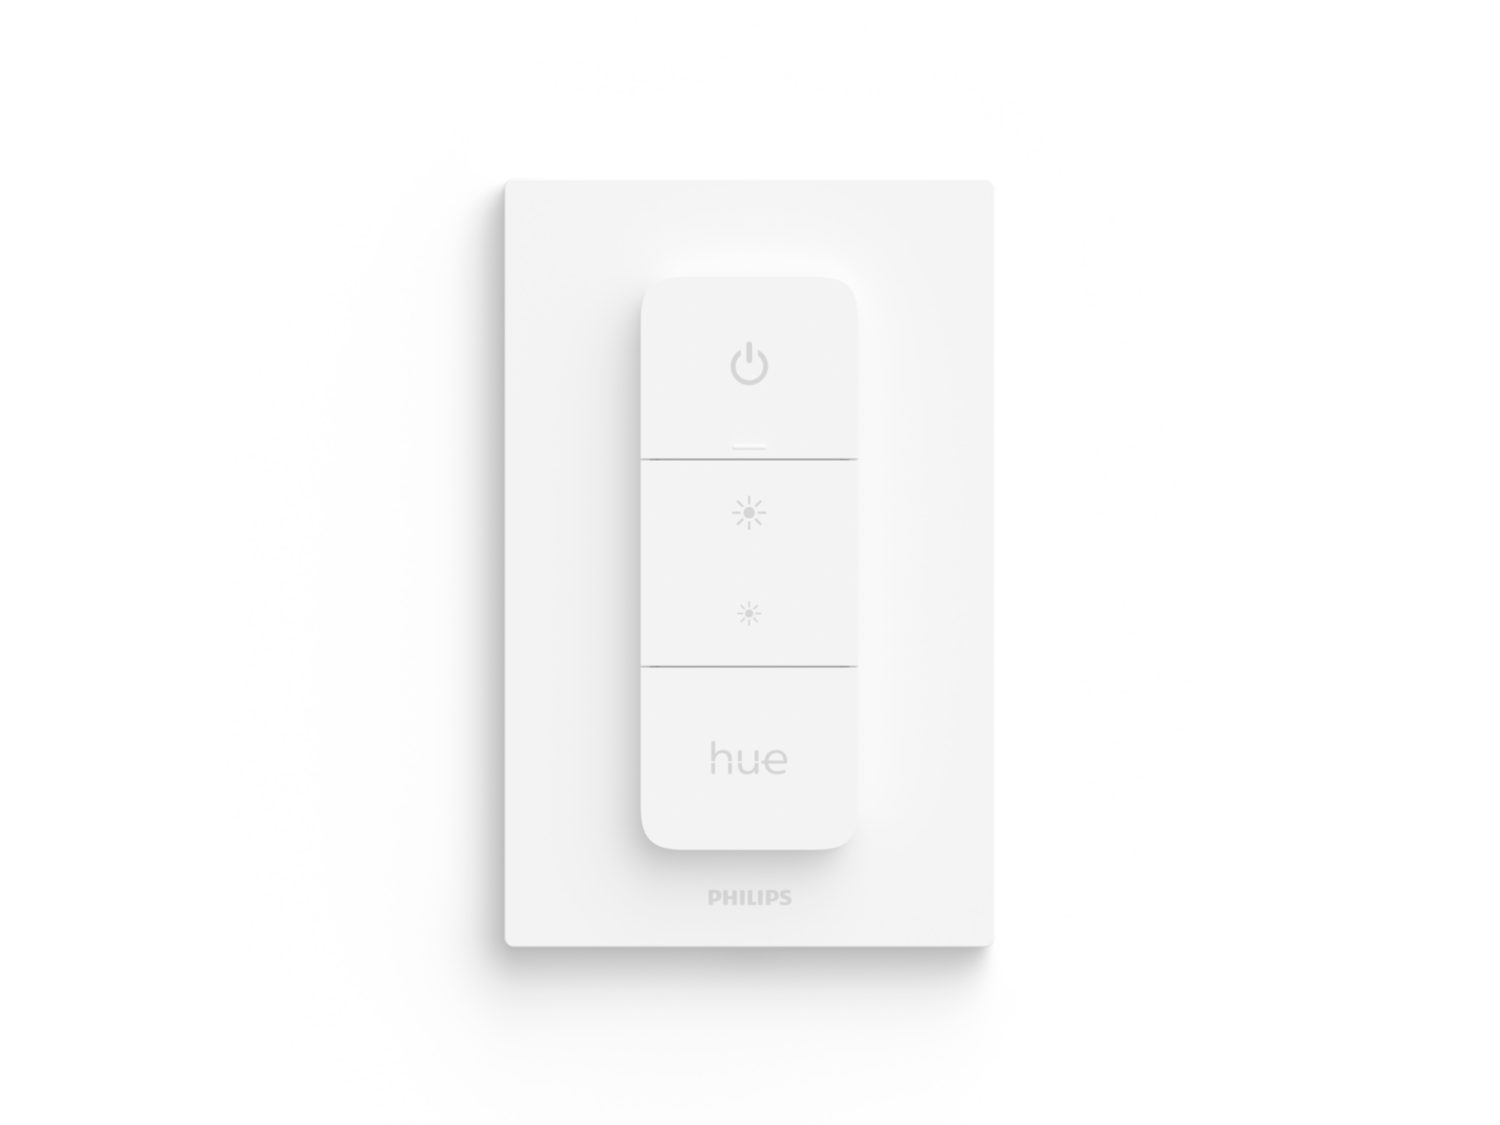 Philips Hue Dimmer Switch featured